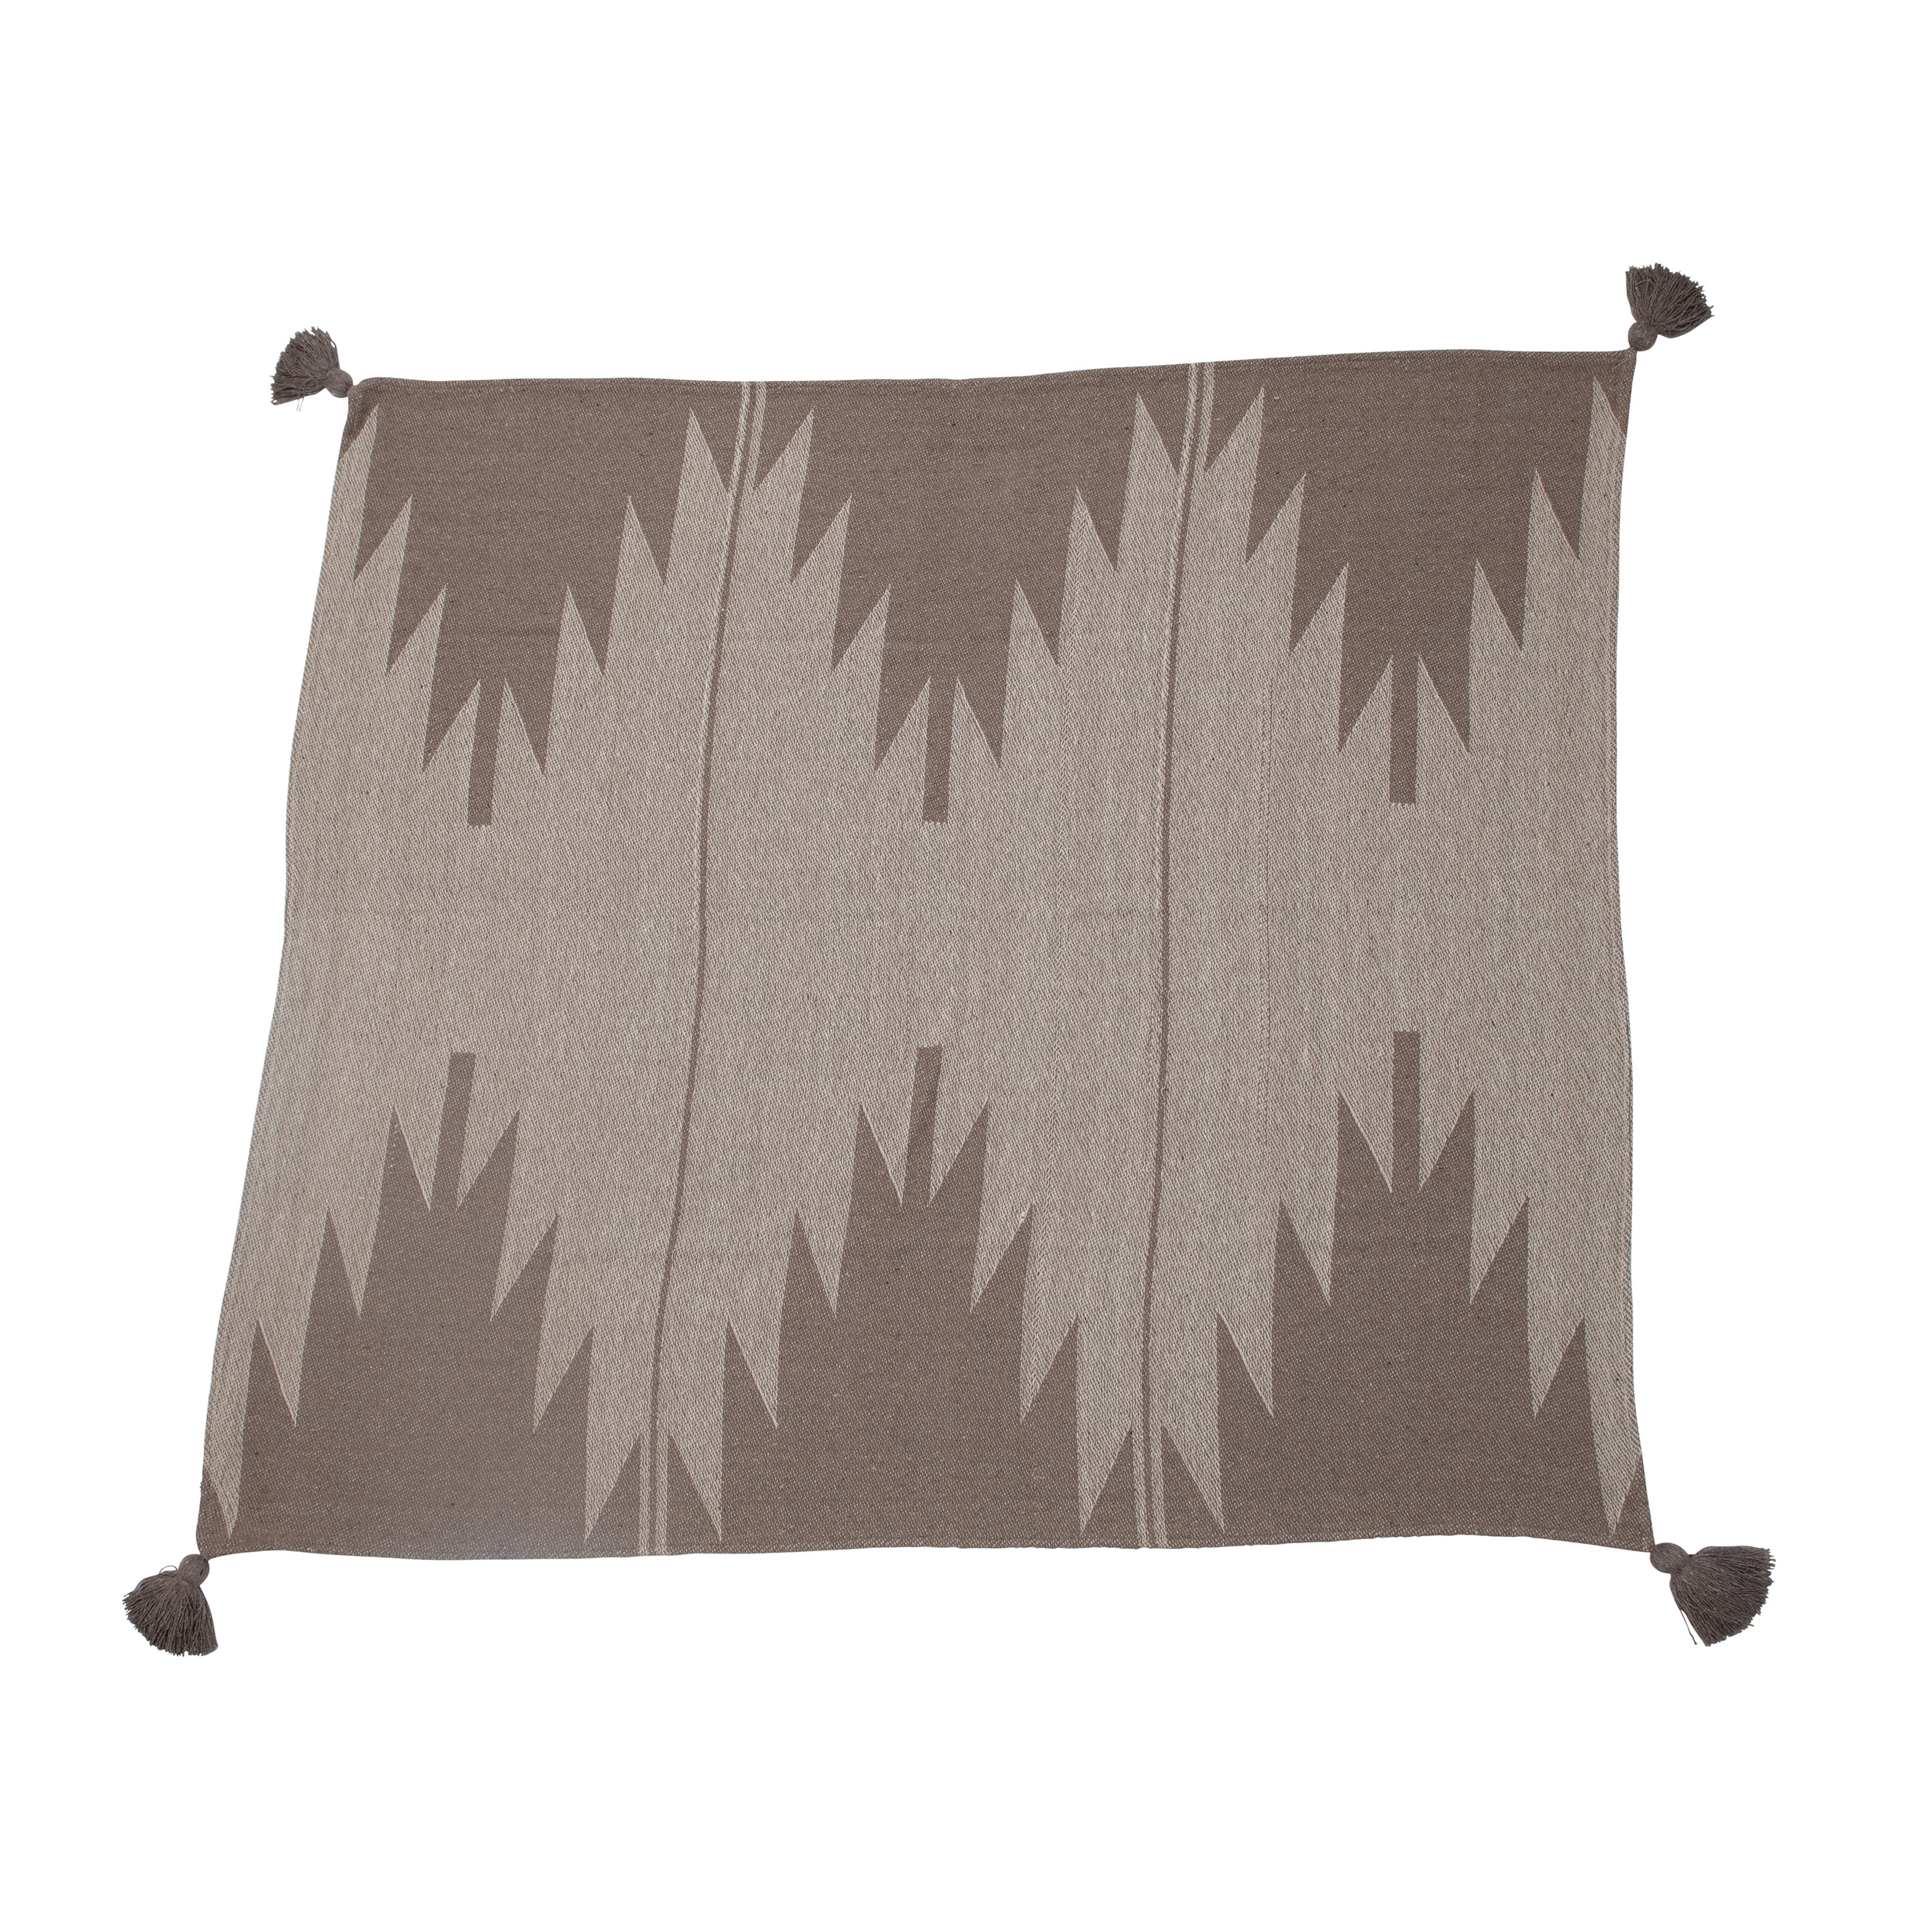 Southwest-Inspired Decorative Woven Recycled Cotton Blend Throw with Neutral Aztec Pattern and Tassels - Image 1